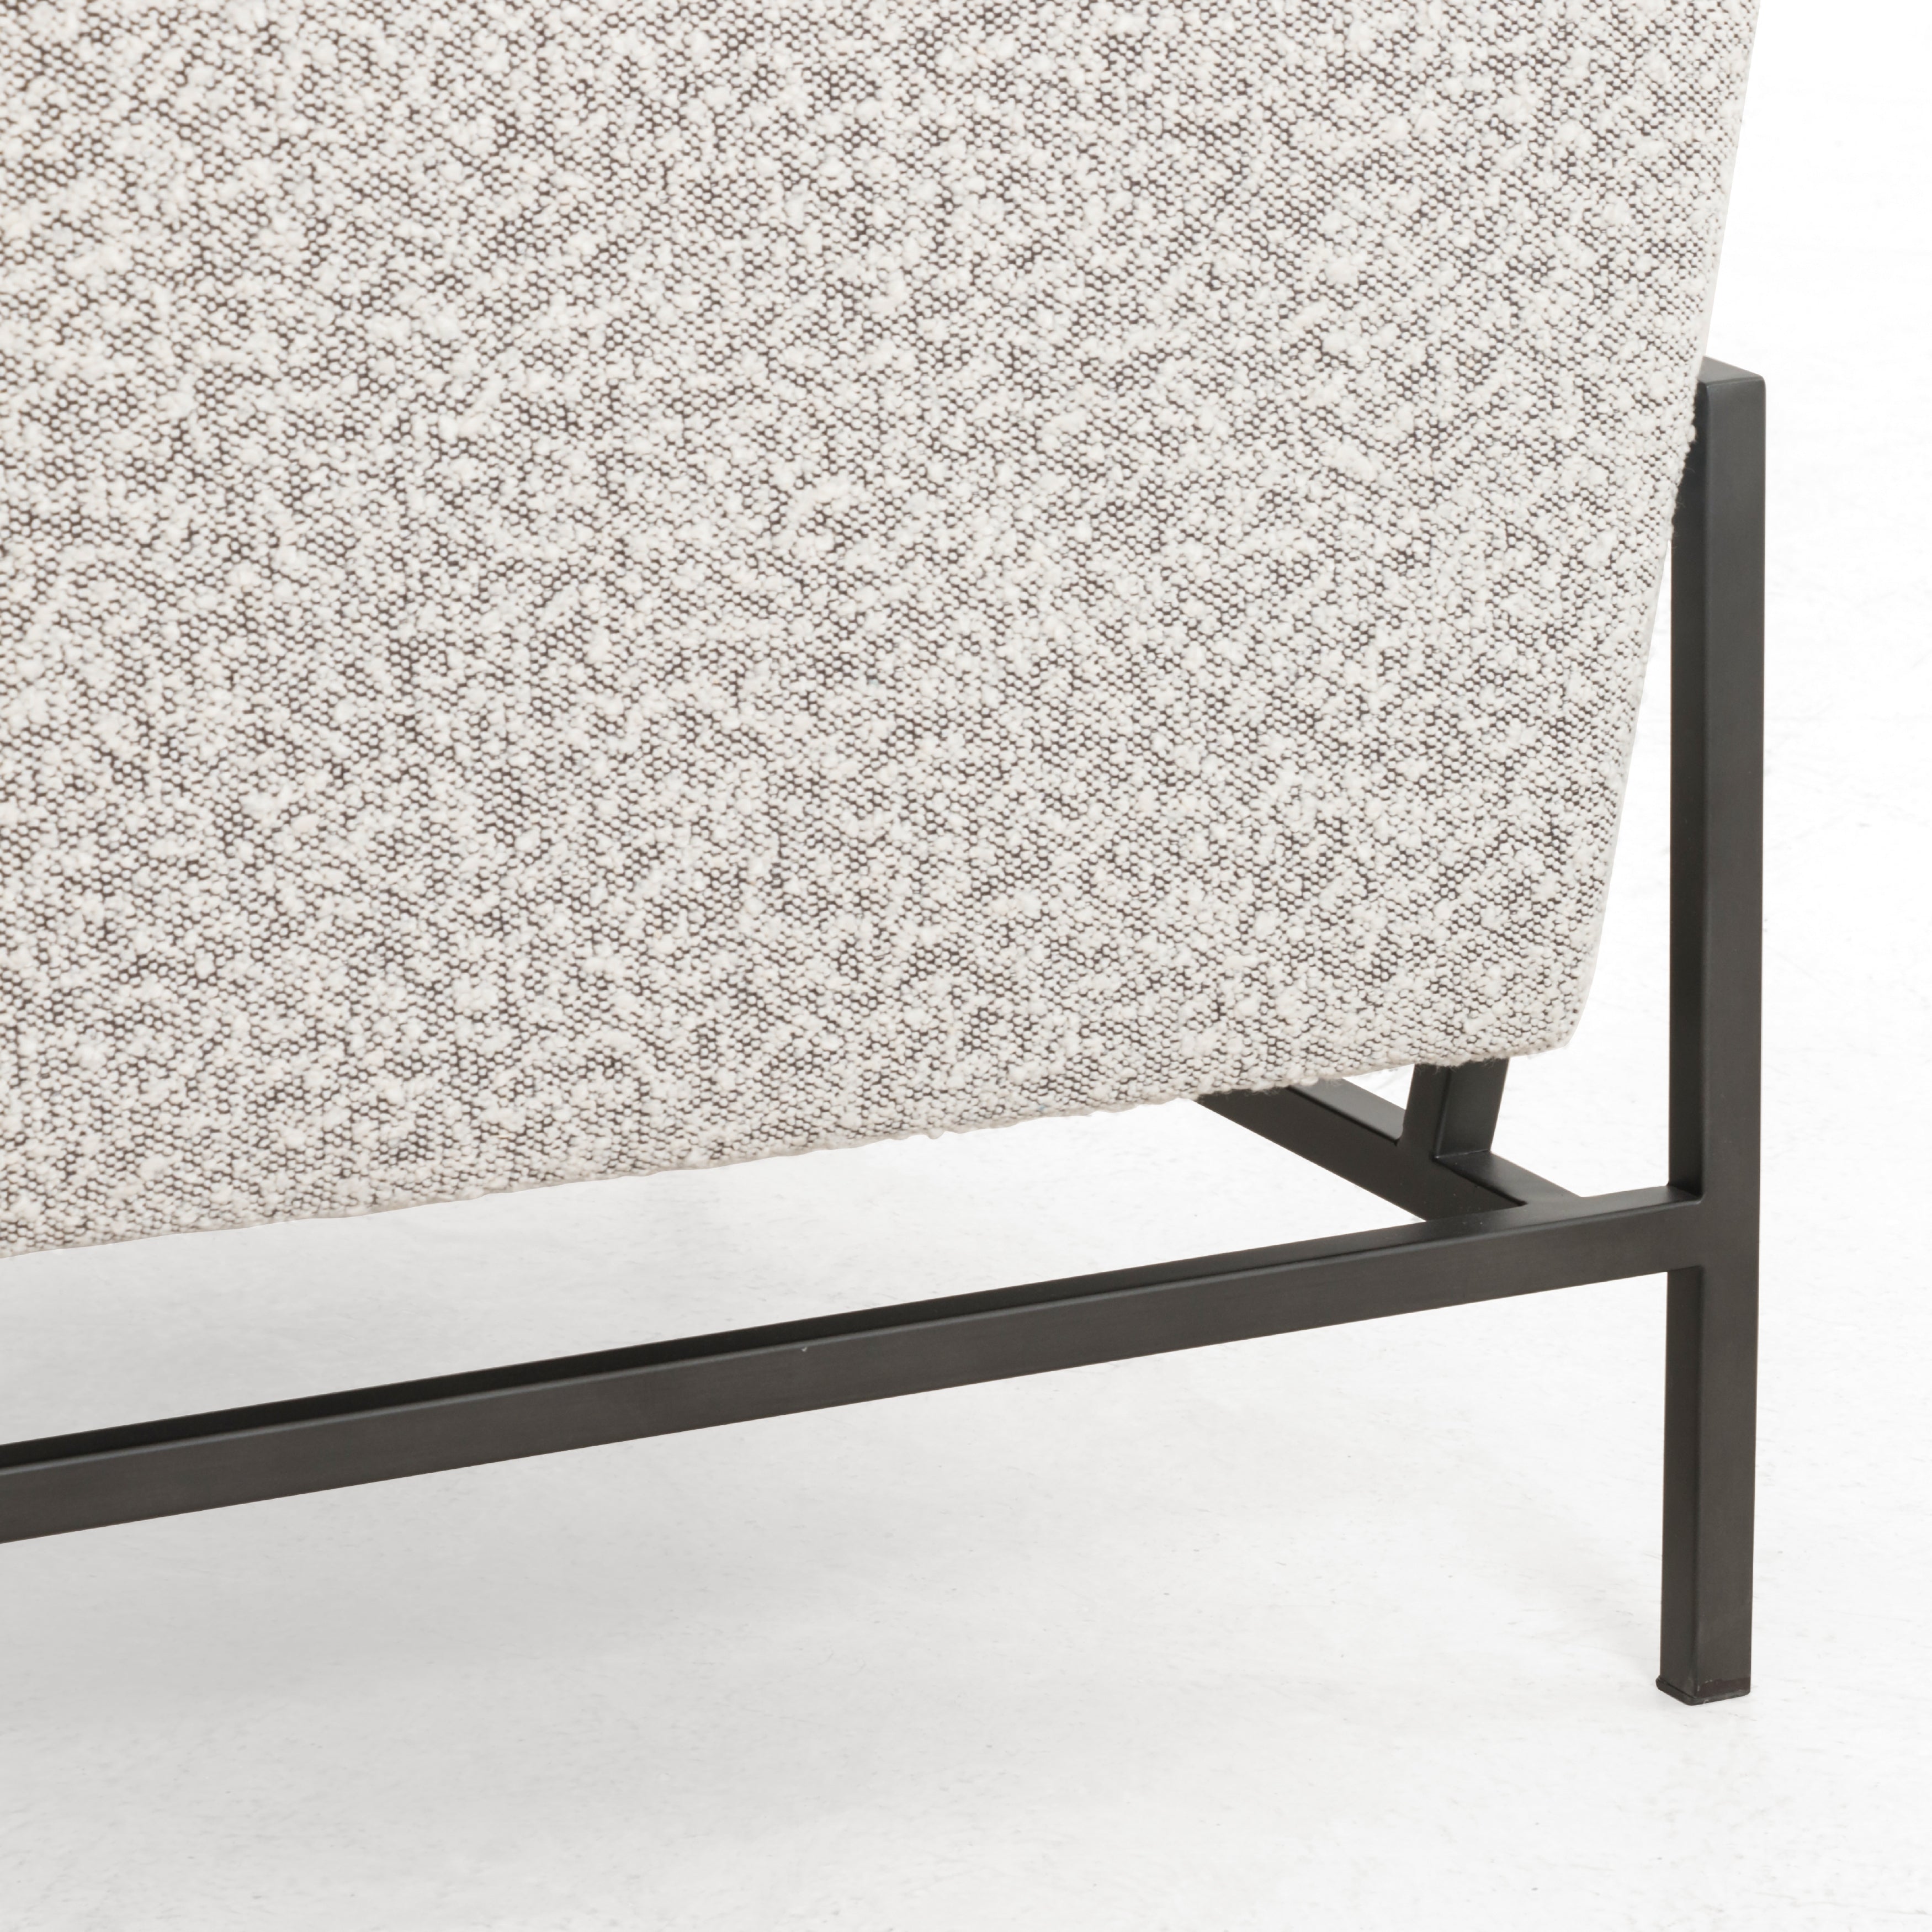 Knoll Domino Fabric with Carbon Ebony Iron | Vanna Chair | Valley Ridge Furniture